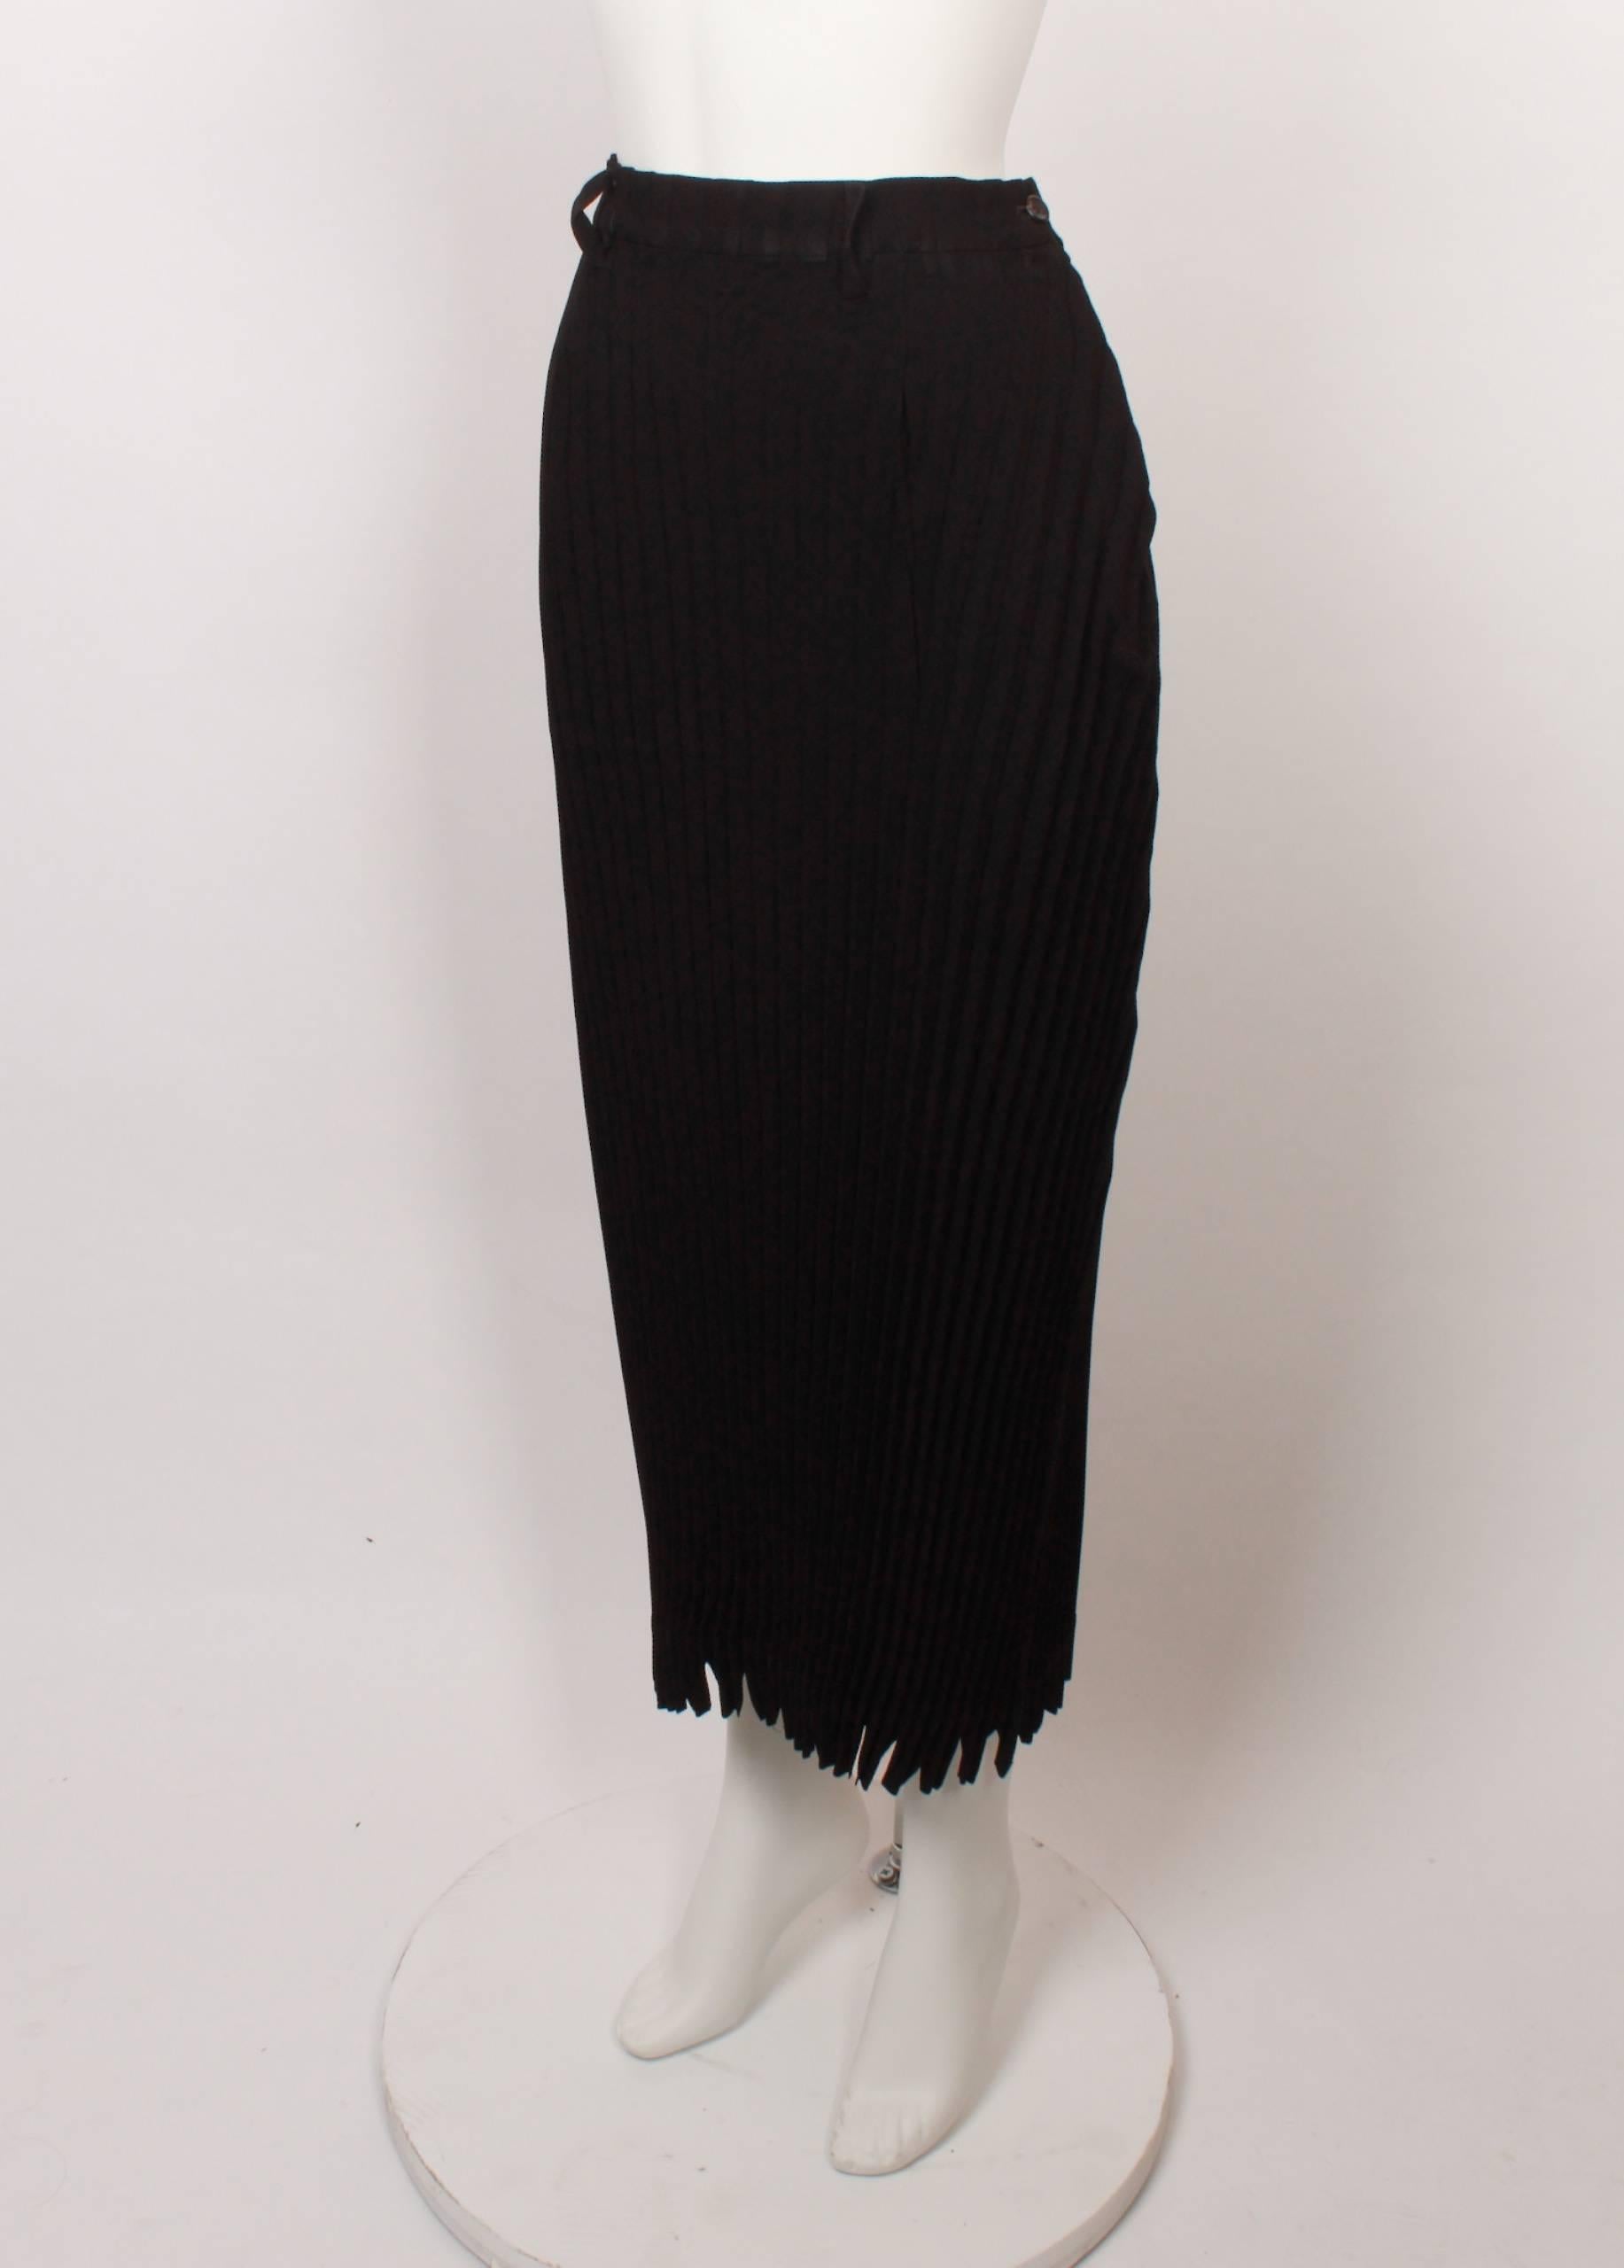 Classic yet always contemporary, 1990s Issey Miyake 3/4 length black skirt in iconic Issey Miyake textural pleats that hug the body. 
Features belt loops and button closure.
The pleats make the fabric slightly stretchy and hip measurements are with